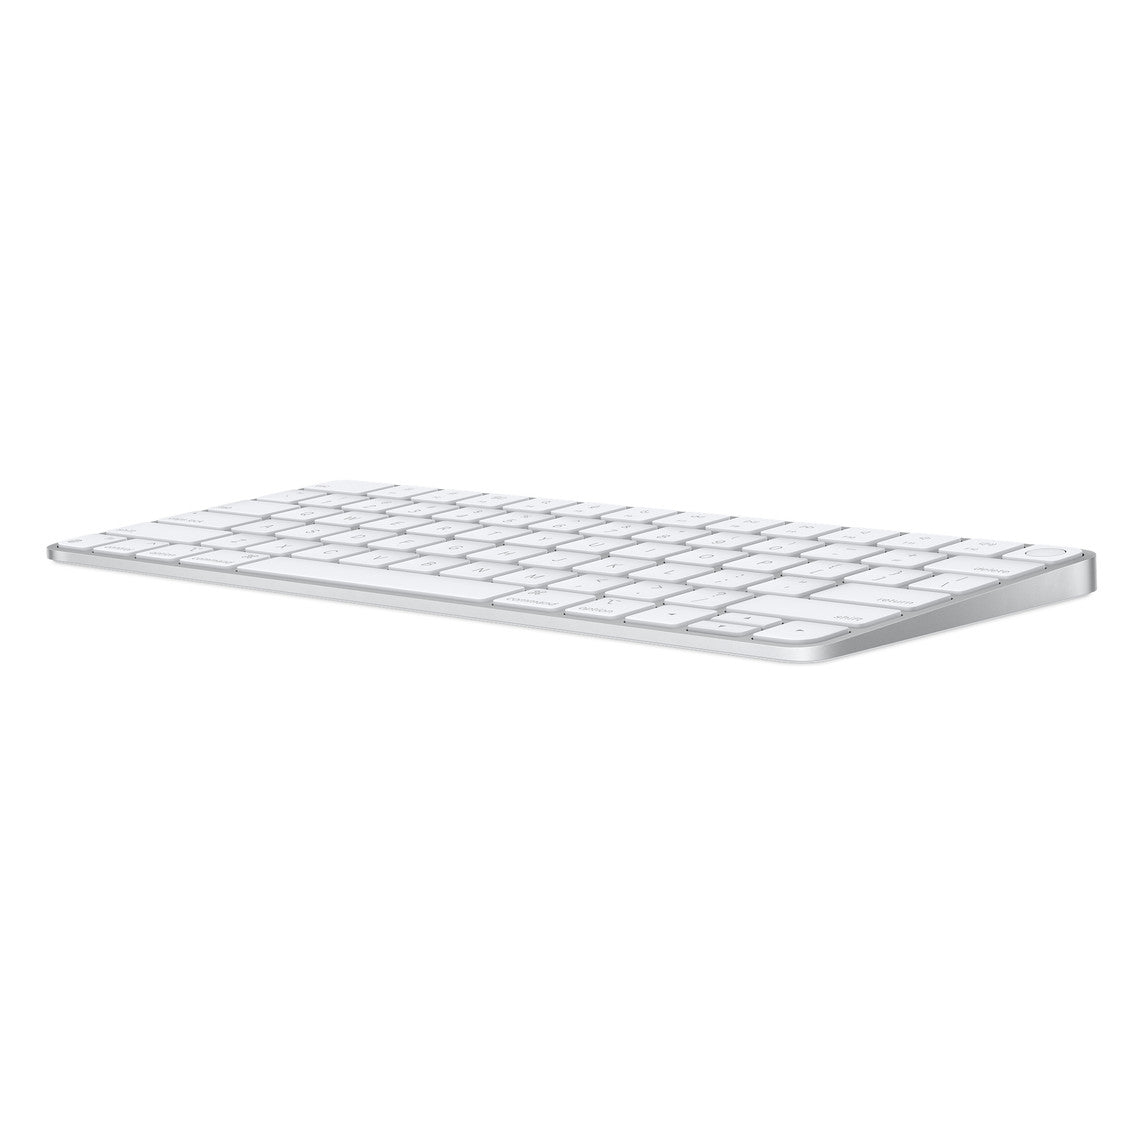 Magic Keyboard with Touch ID for Mac computers with Apple silicon - Arabic